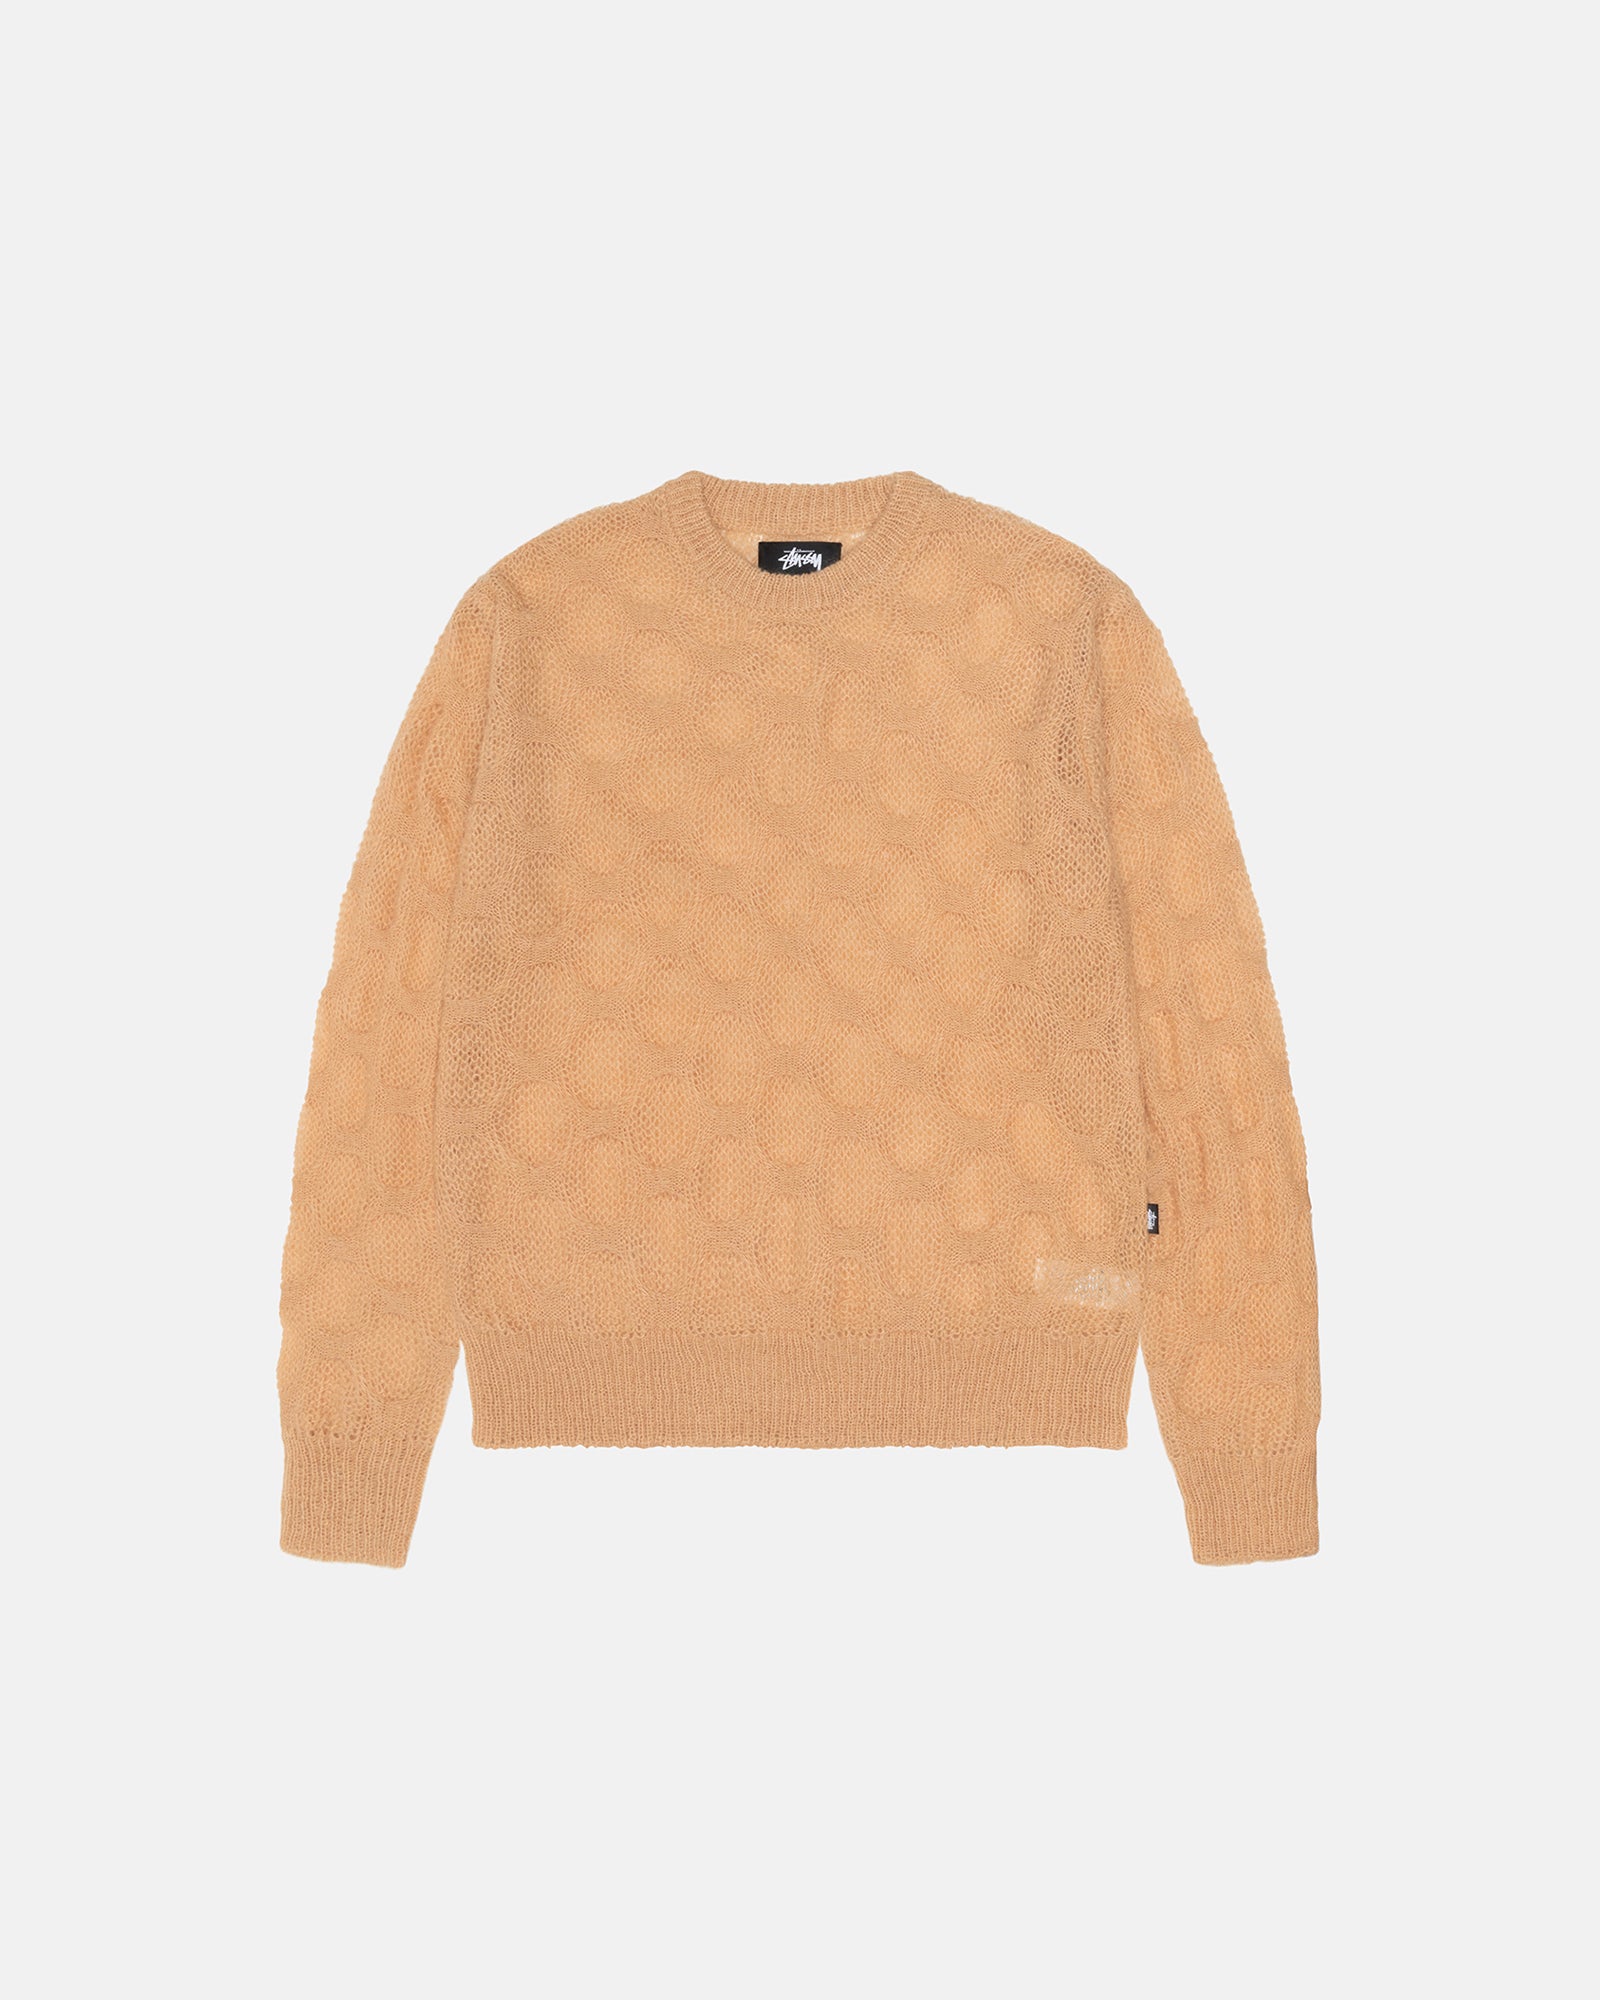 STÜSSY LOOSE KNIT CROSS CABLE SWEATER SAND SWEATER